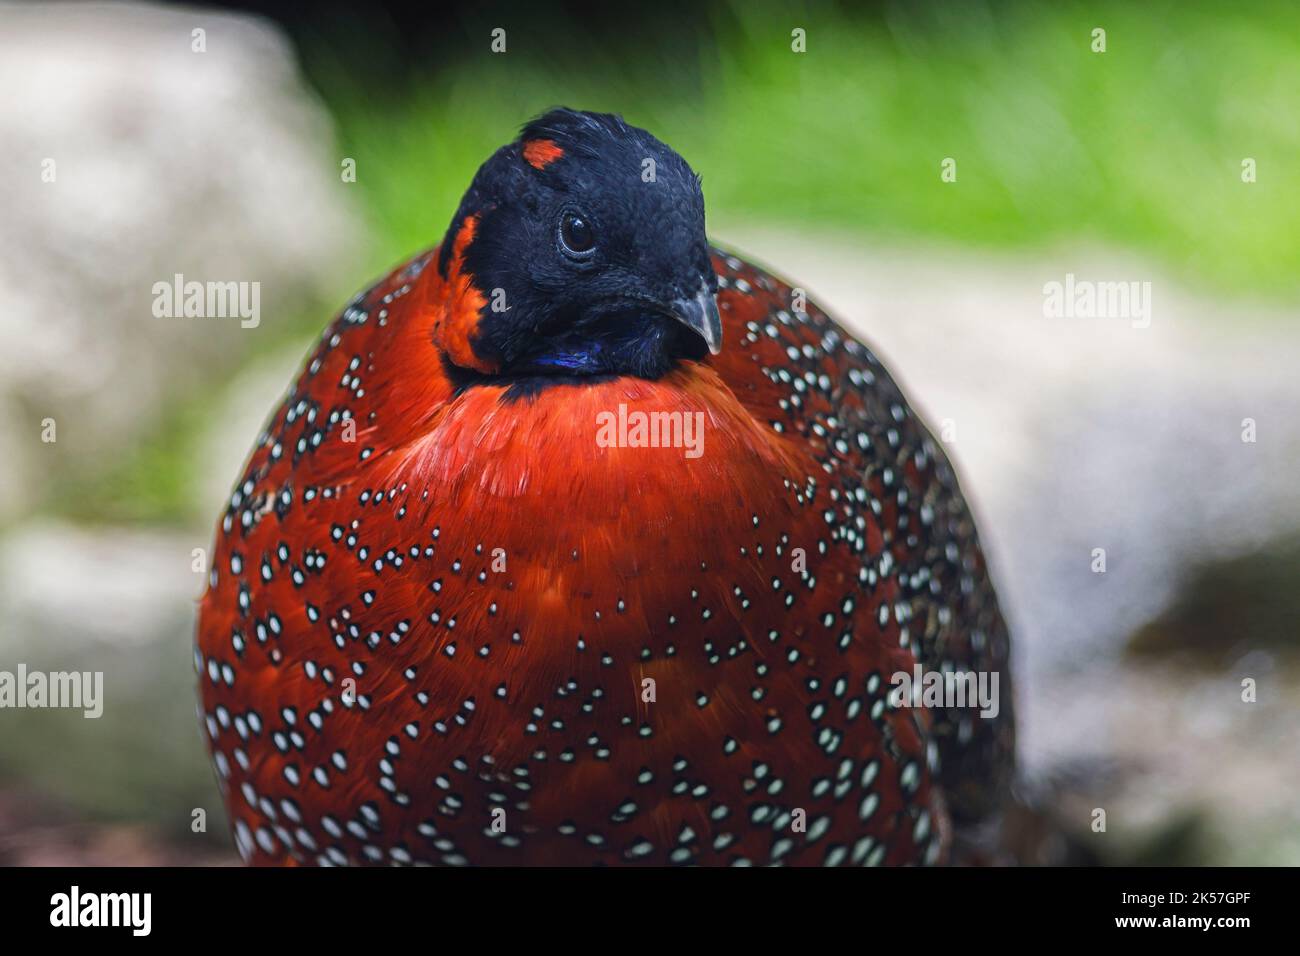 France, Seine-Maritime, Clères, zoological park, portrait of Satyr tragopan(Tragopan satyra), also called crimson horned pheasant, belonging to the Pheasant family, bird native to Indian Himalaya Stock Photo